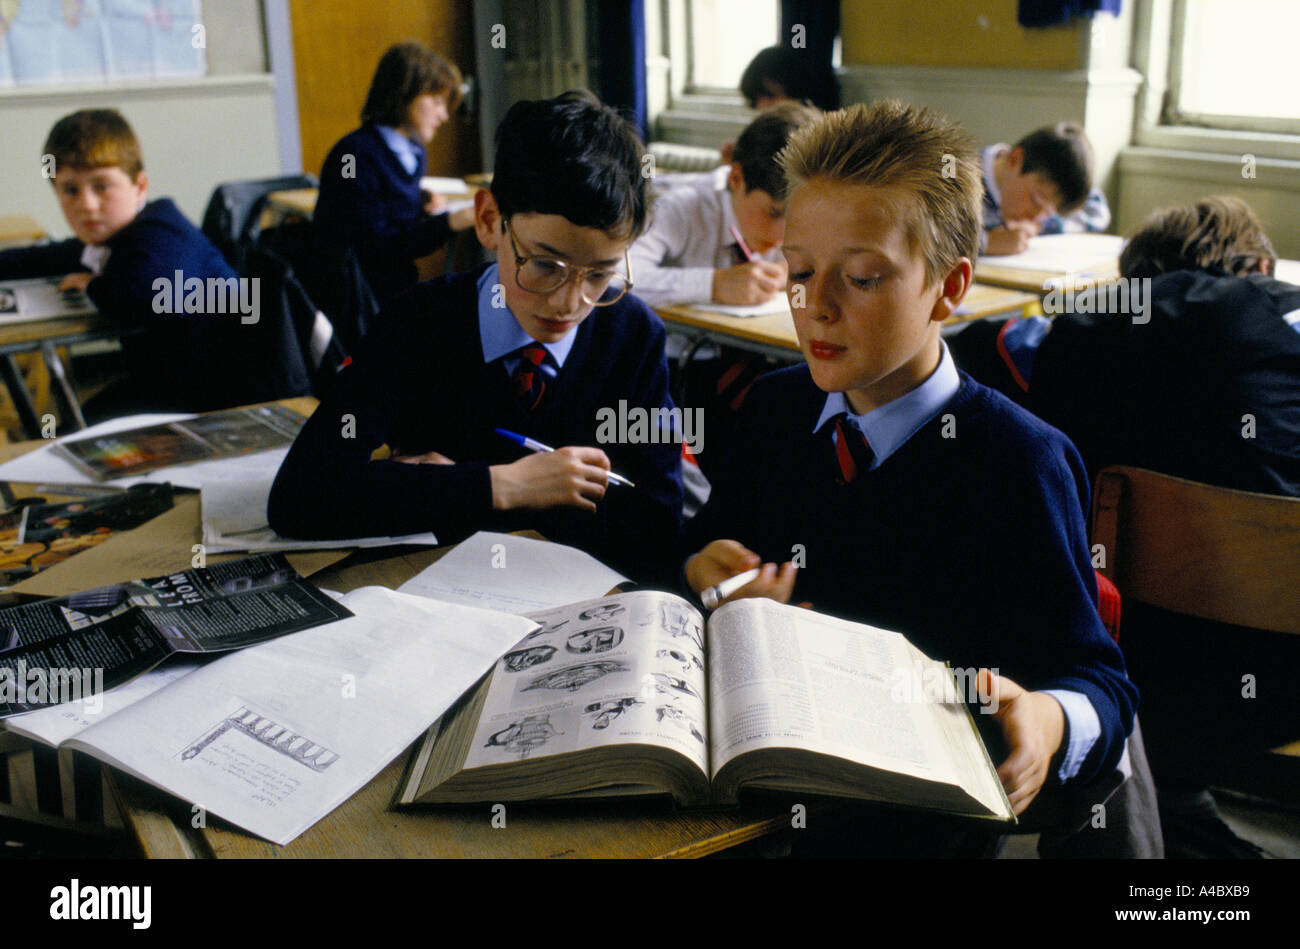 Boys work together in class on a history project at a state secondary school. Stock Photo